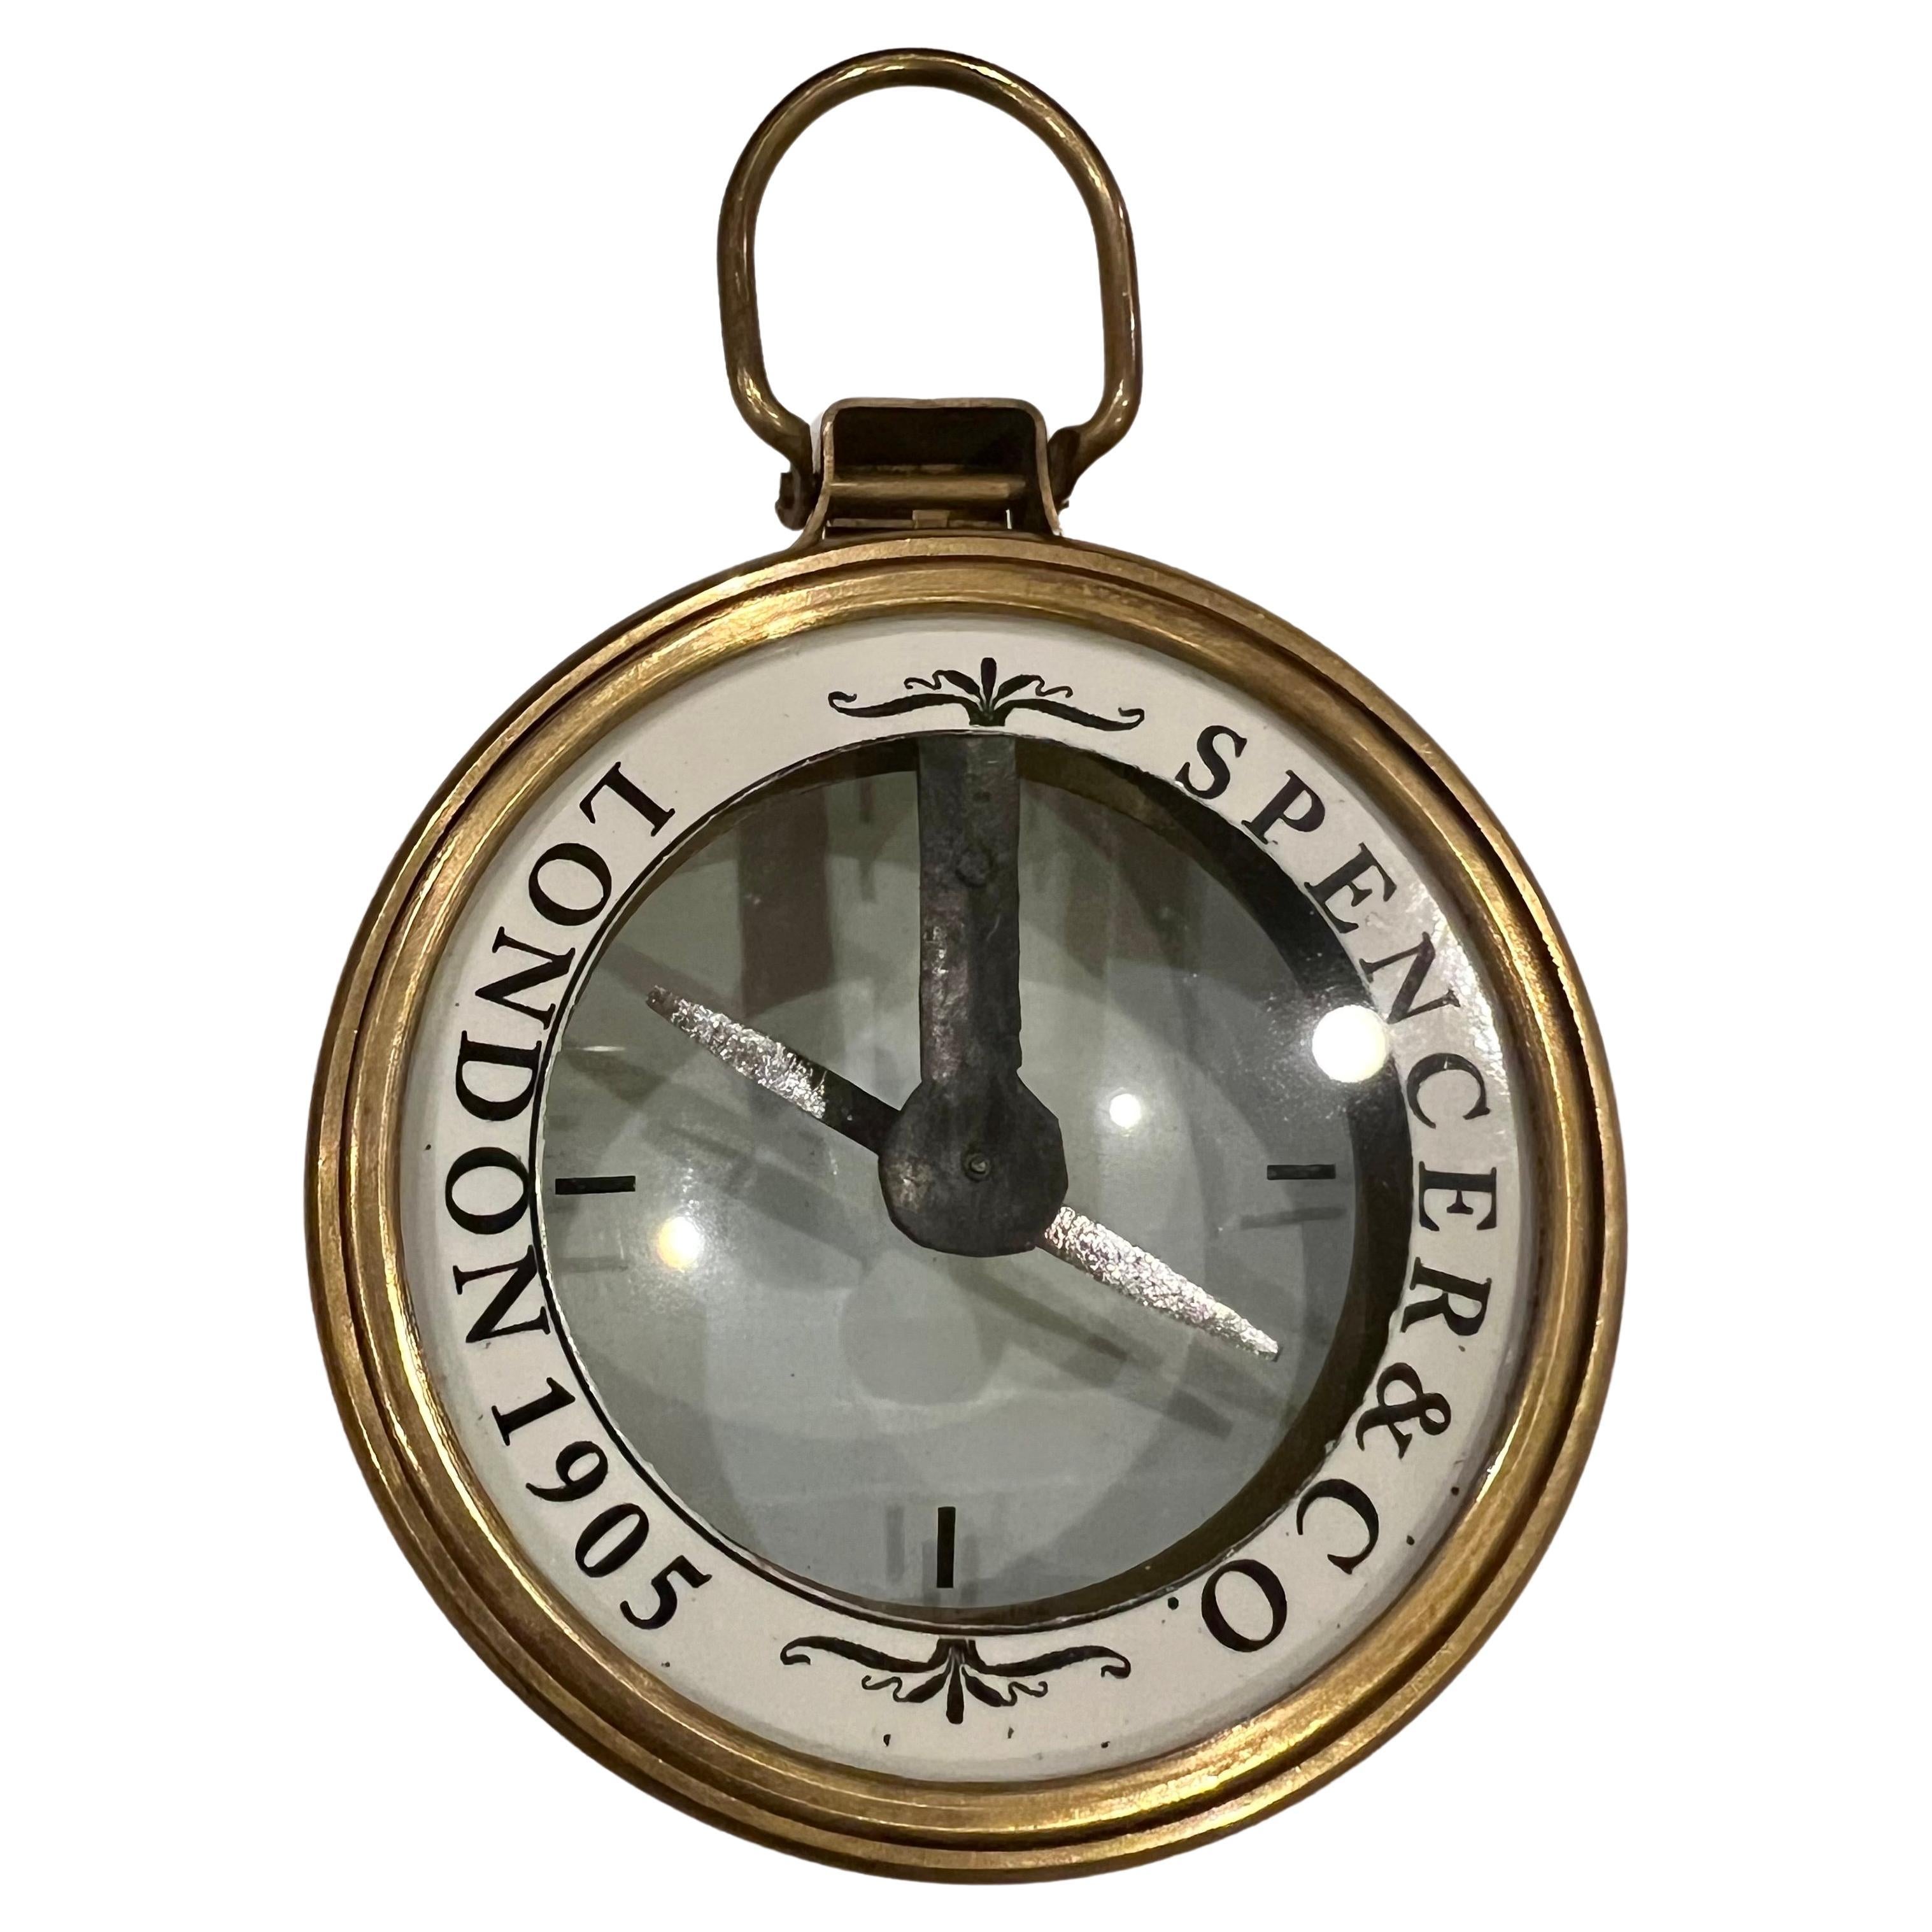 Antique English Brass & Glass Elegant Compass by Spencer & Co London